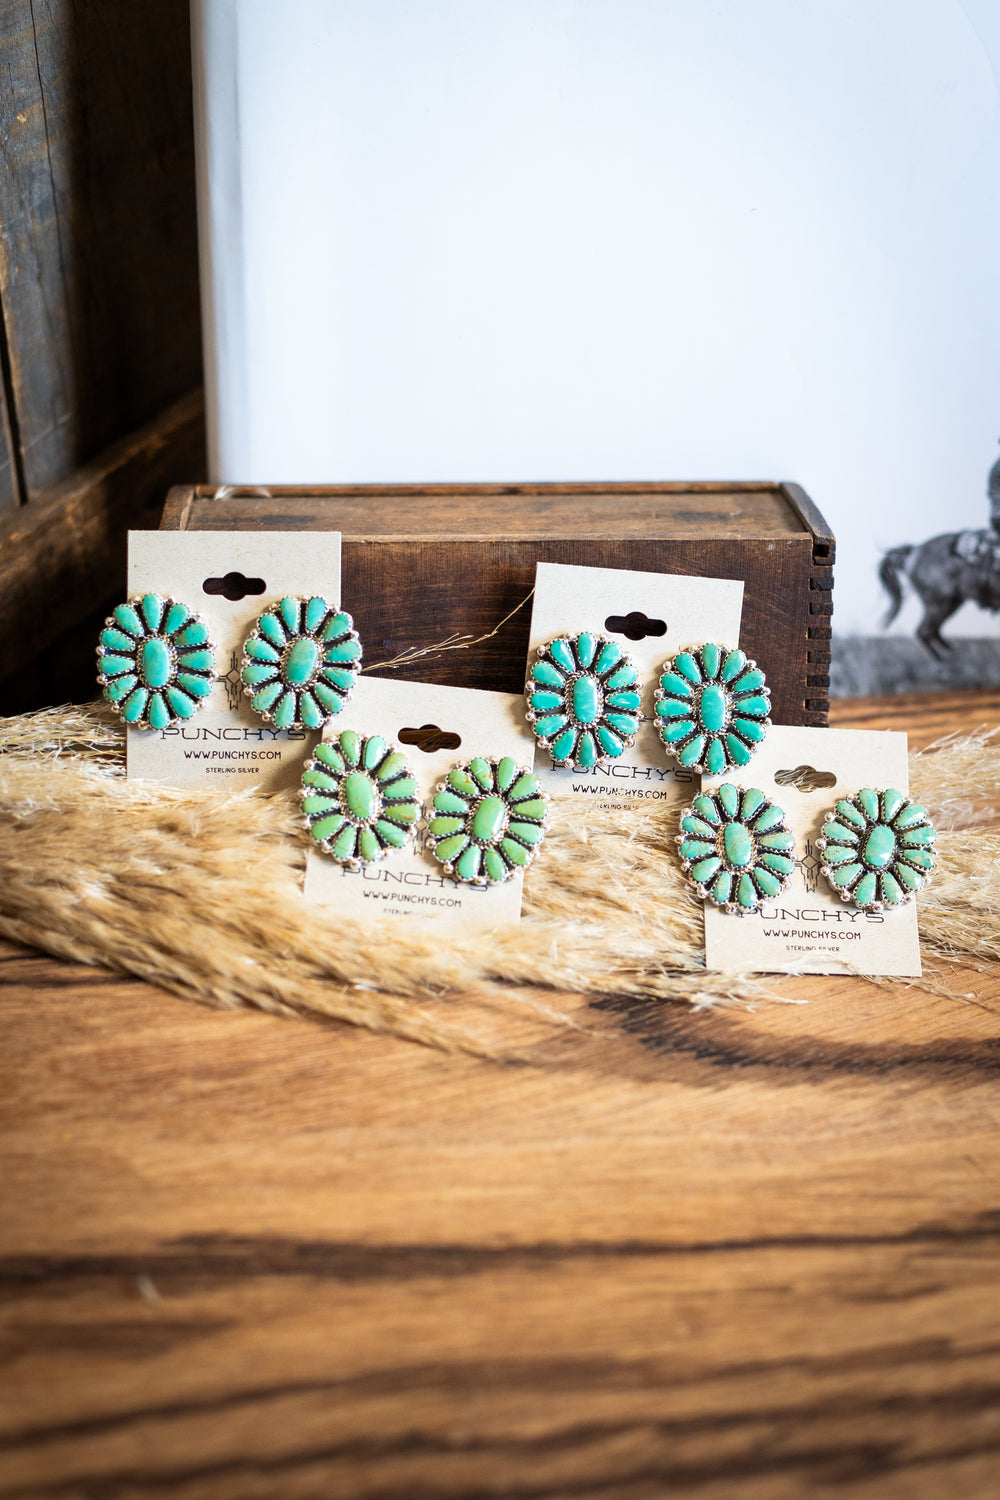 Kingman Green Turquoise Oval Cluster Studs